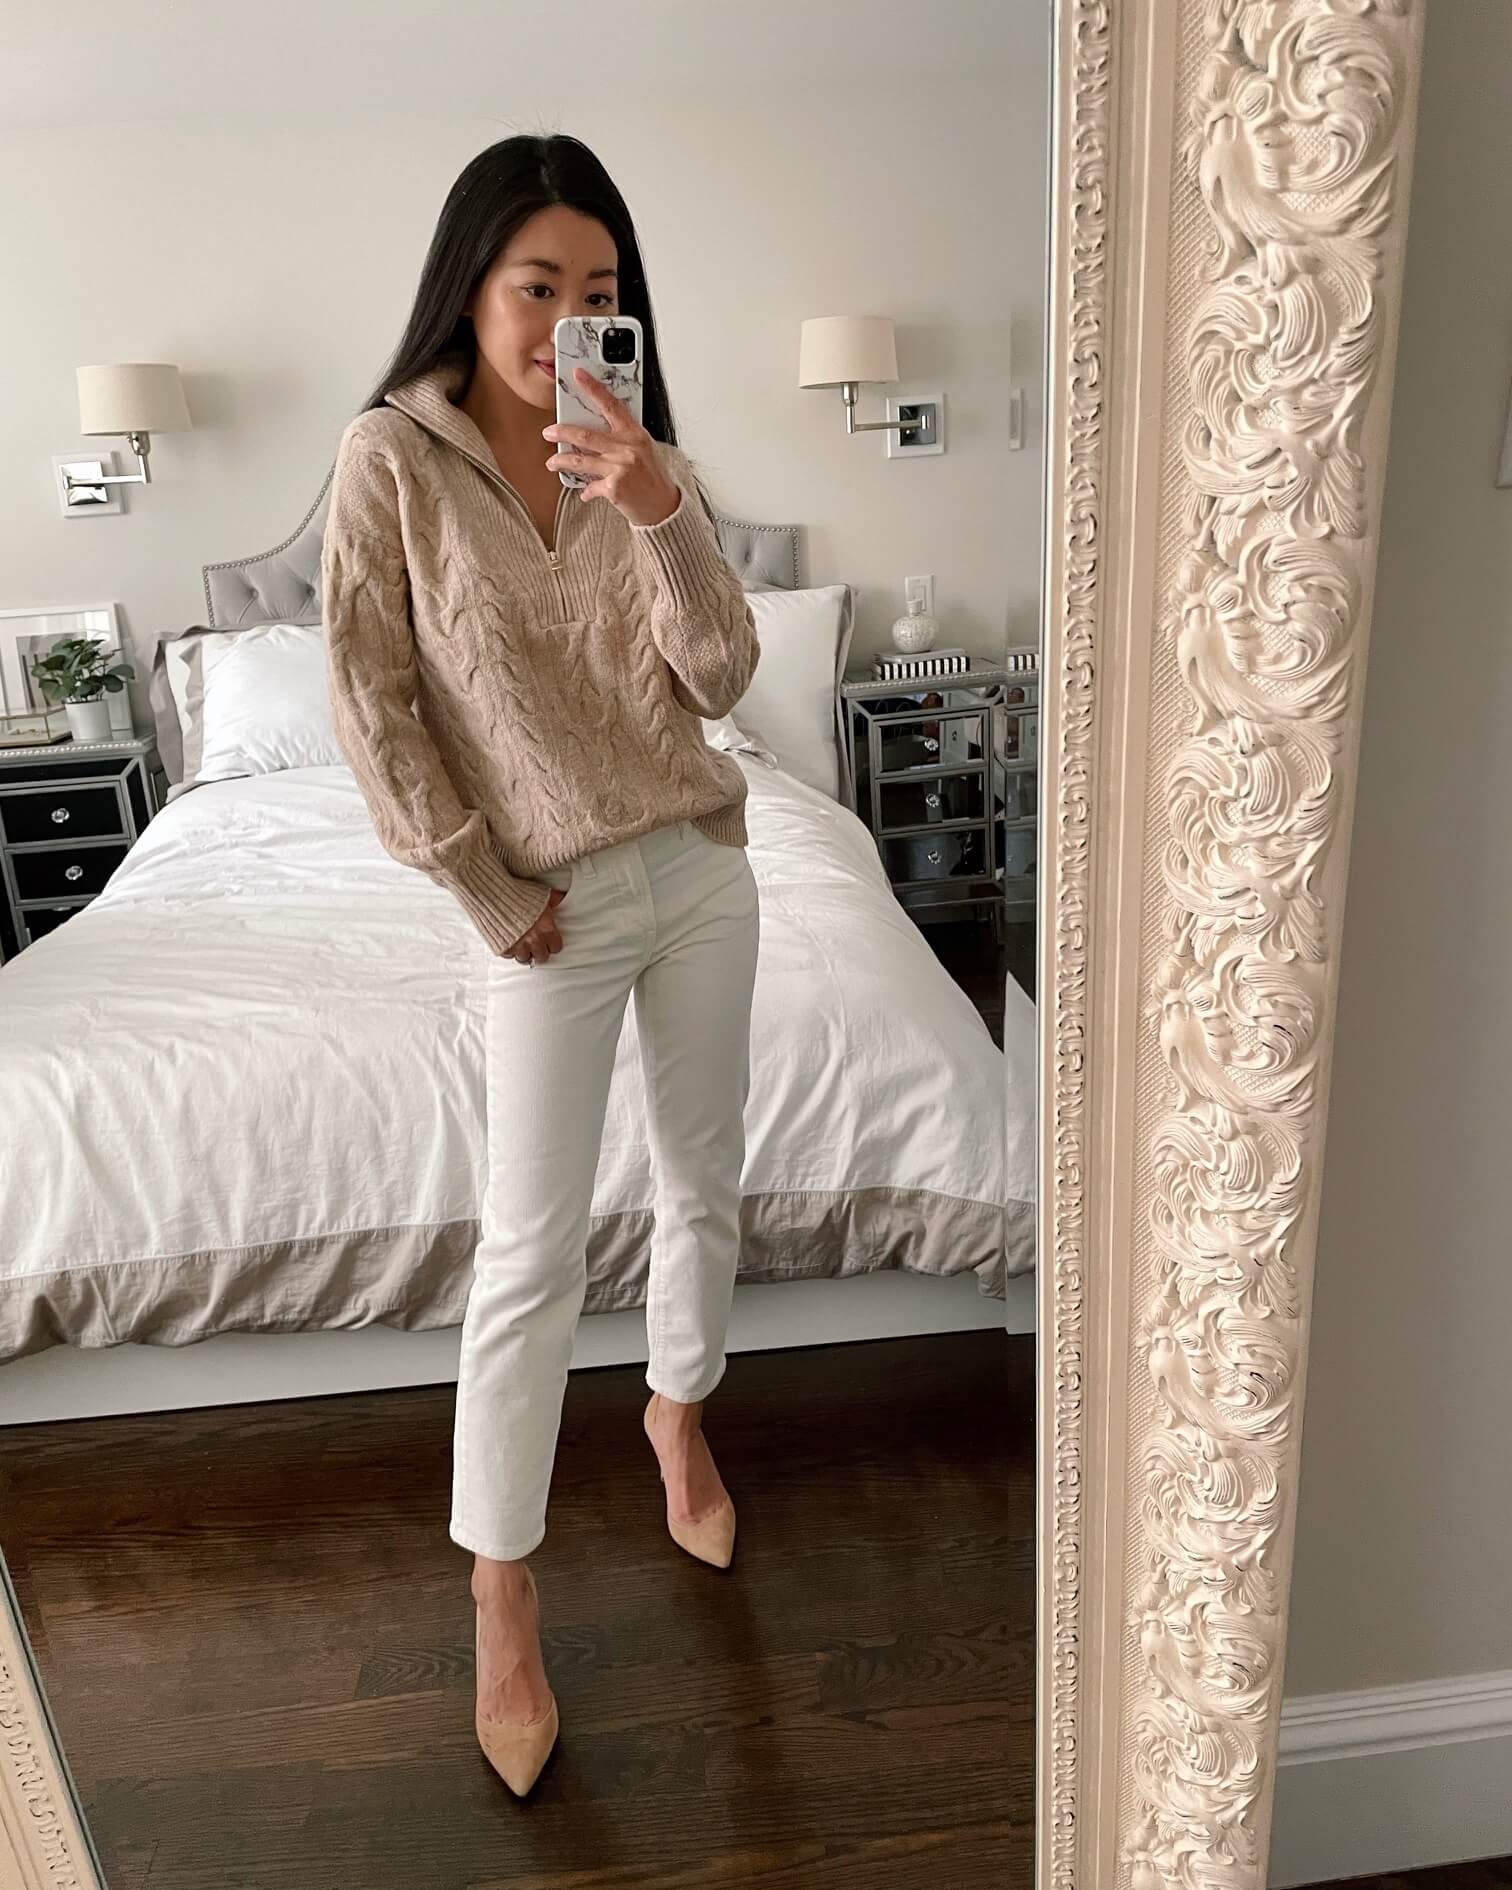 JCrew winter white outfit